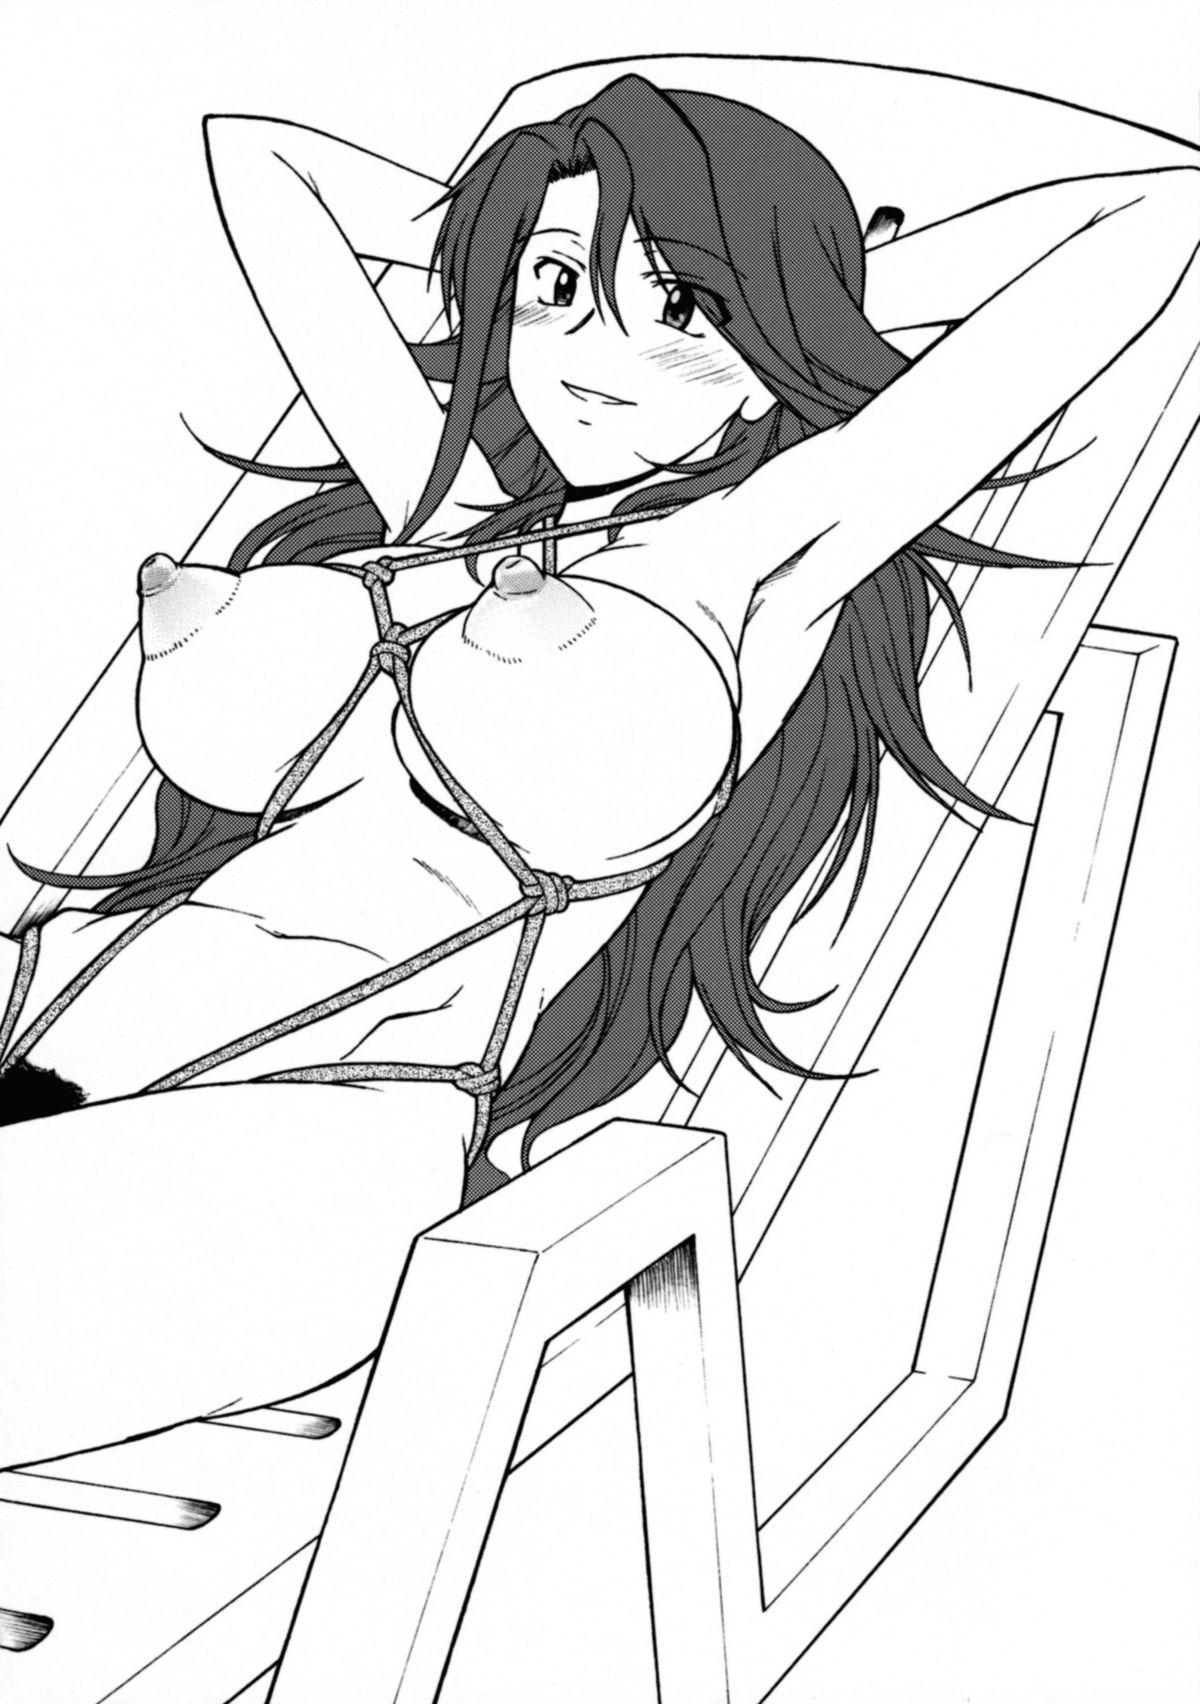 Tiny Titties Lost My Career - Gundam 00 Livecams - Page 3